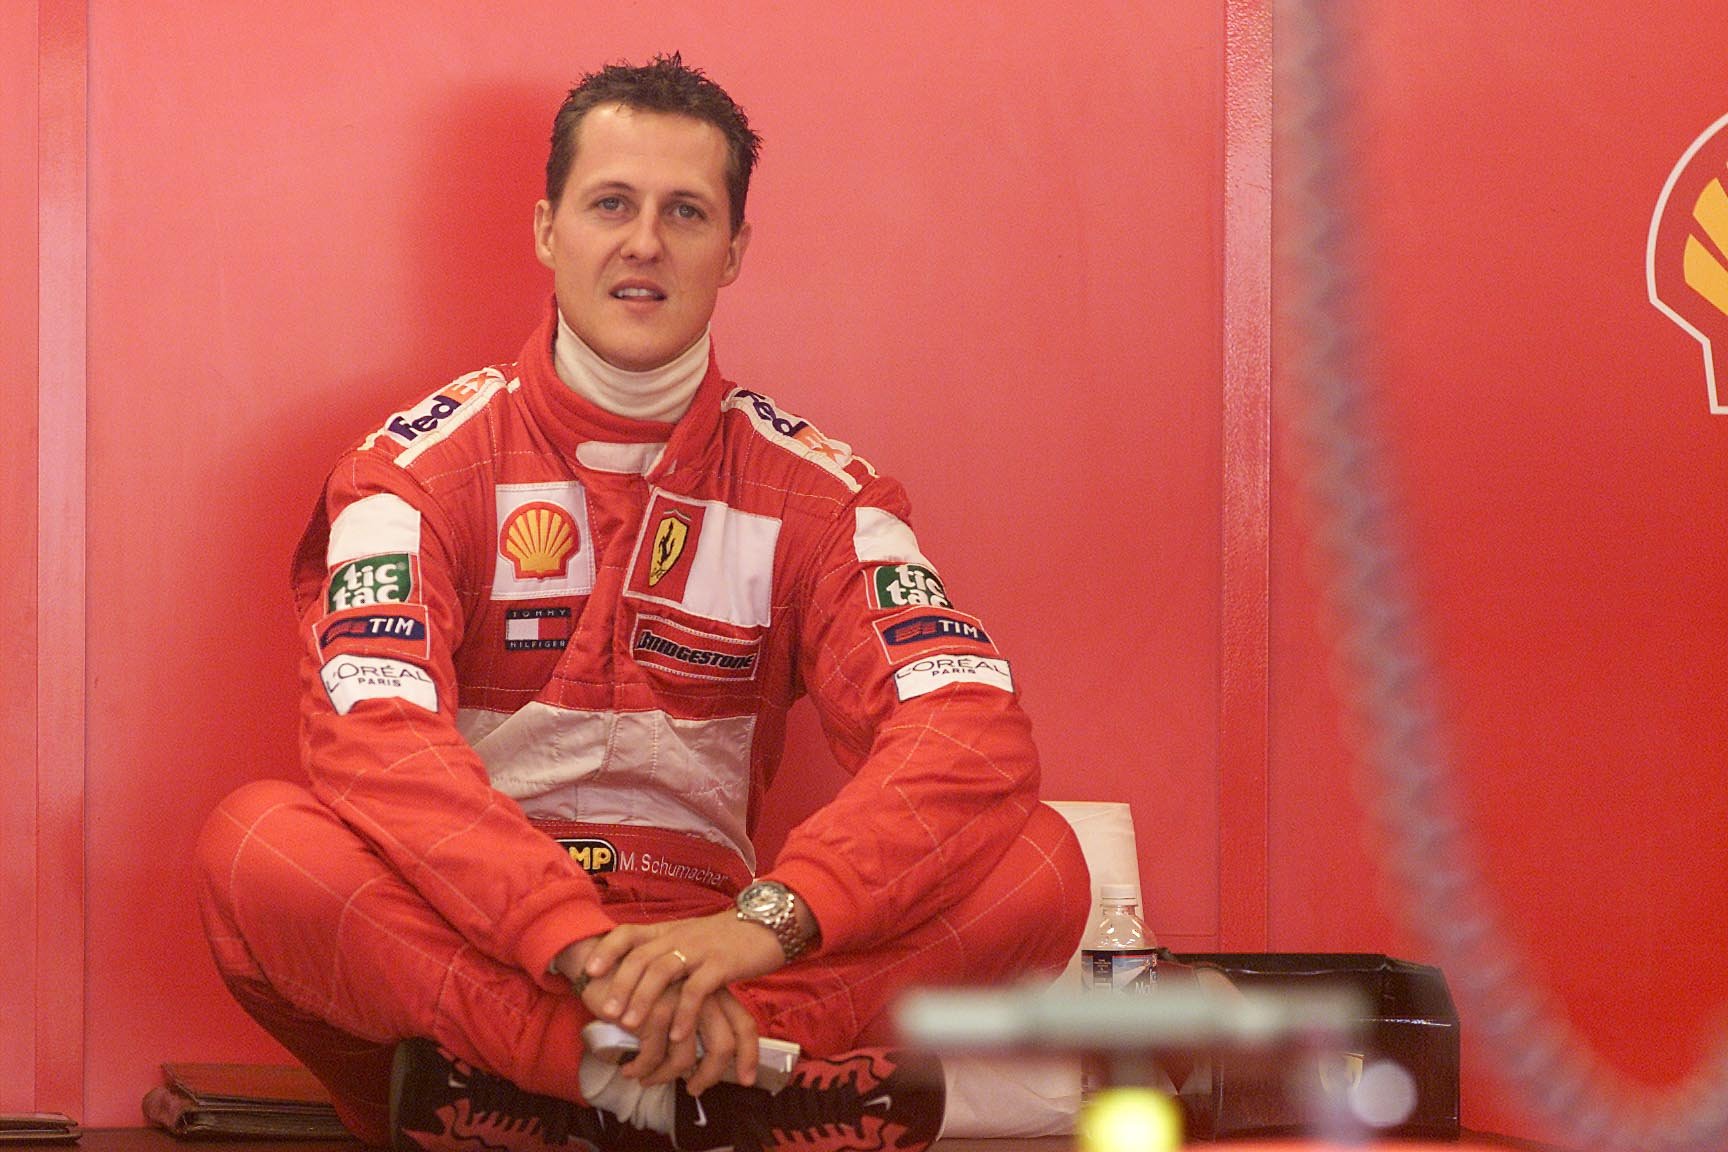 Michael Schumacher Wallpapers And Pictures | Hd Wallpapers